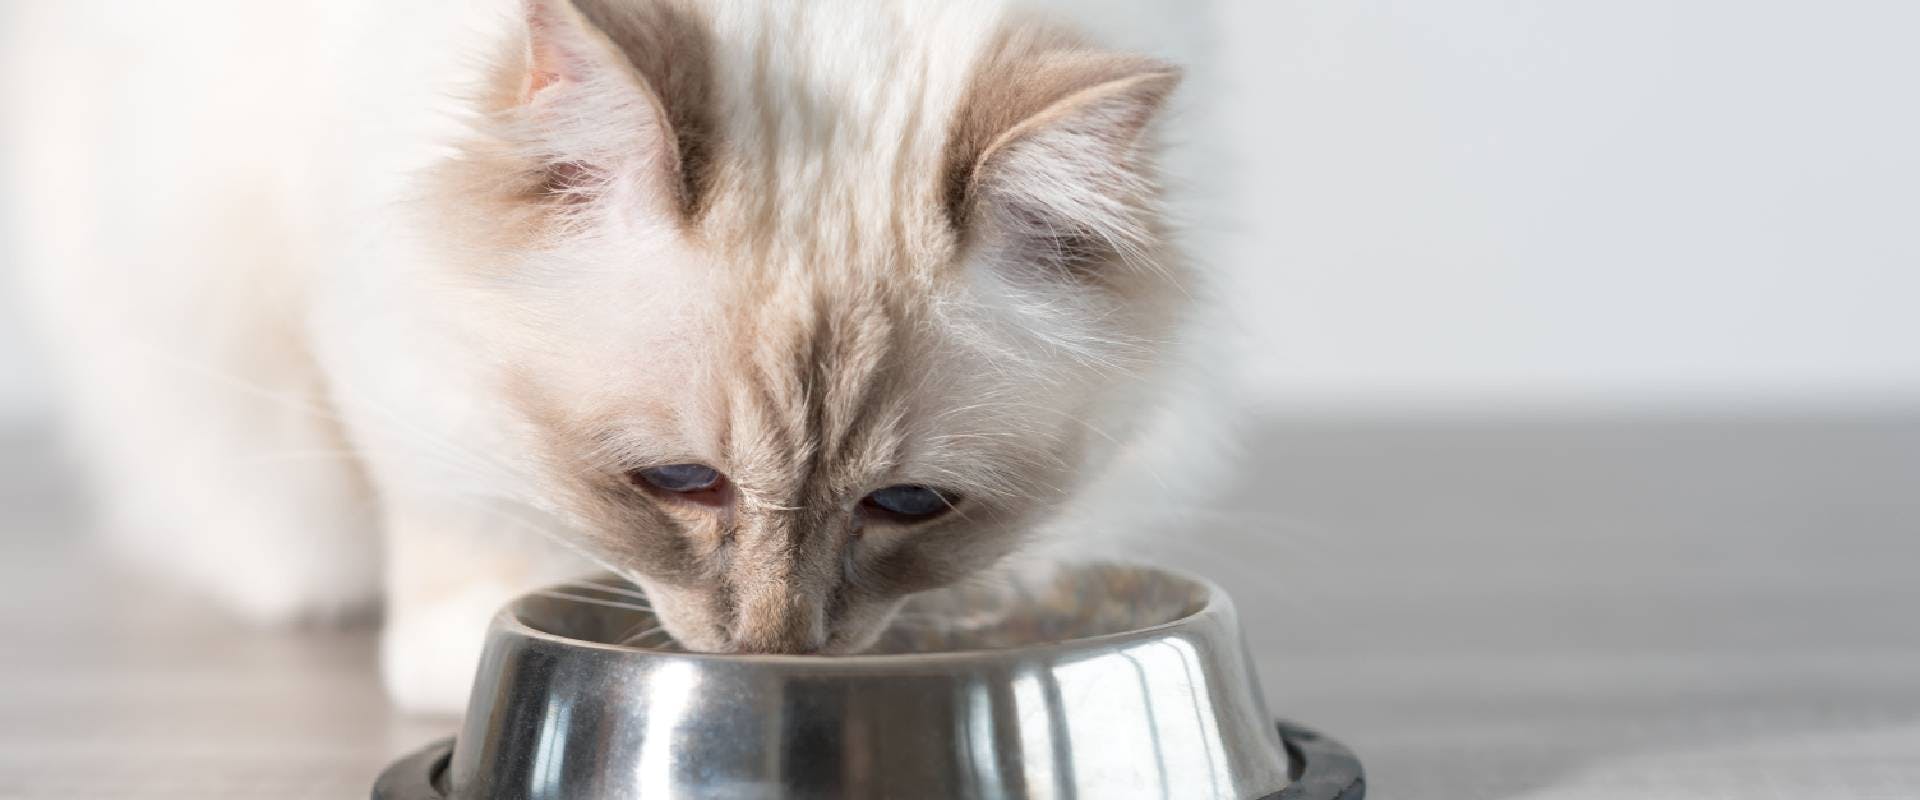 White cat eating from a metal bowl